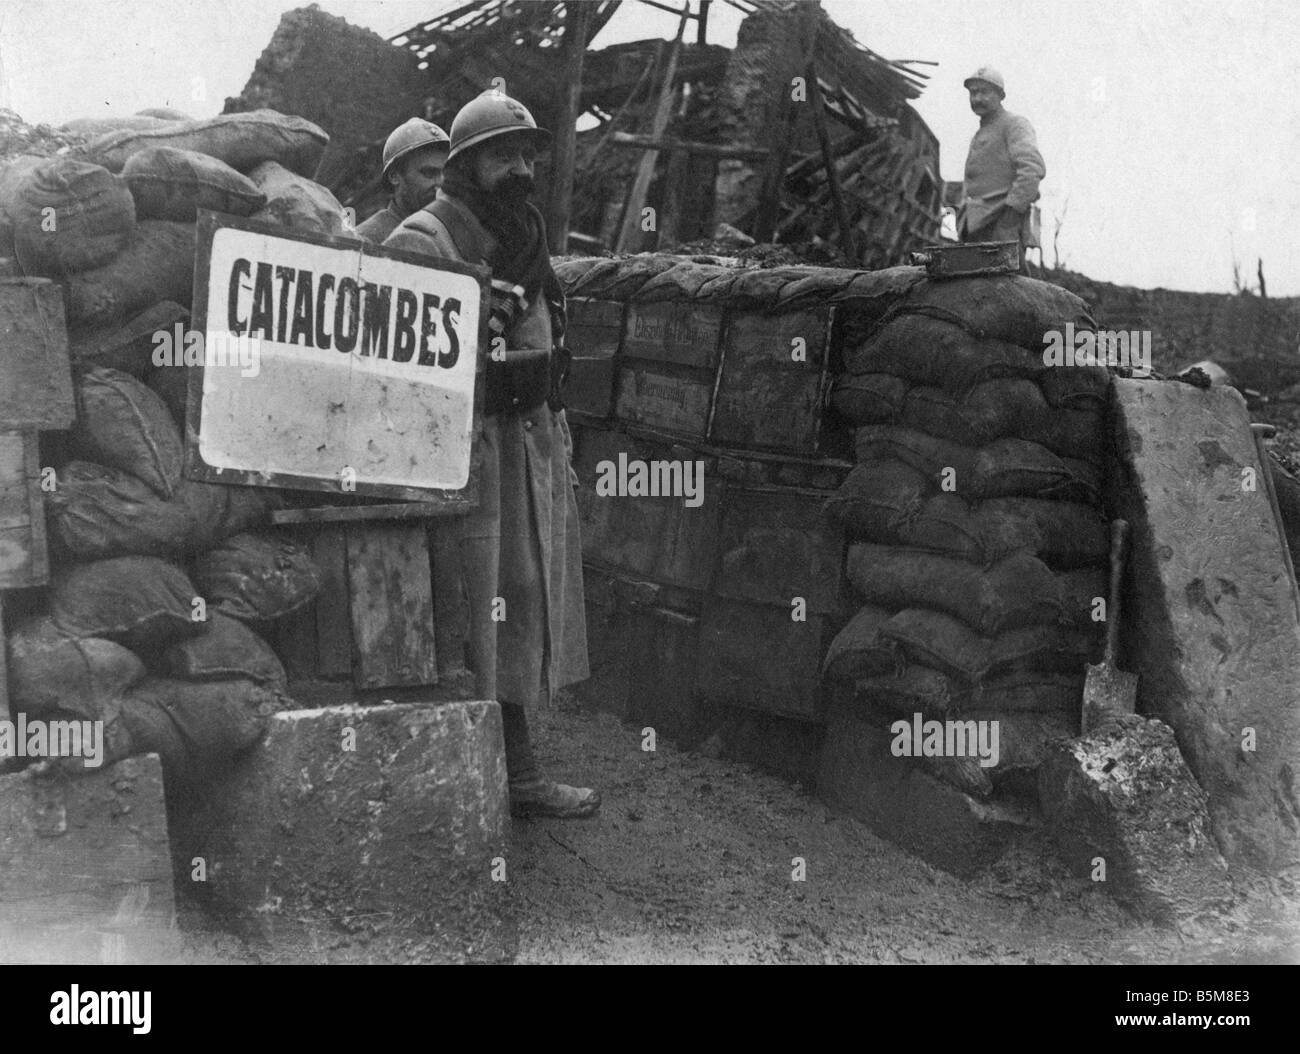 2 G55 F1 1916 62 WW1 French trenches Somme Photo History World War 1 France Battle of the Somme French soldiers at the entrance Stock Photo